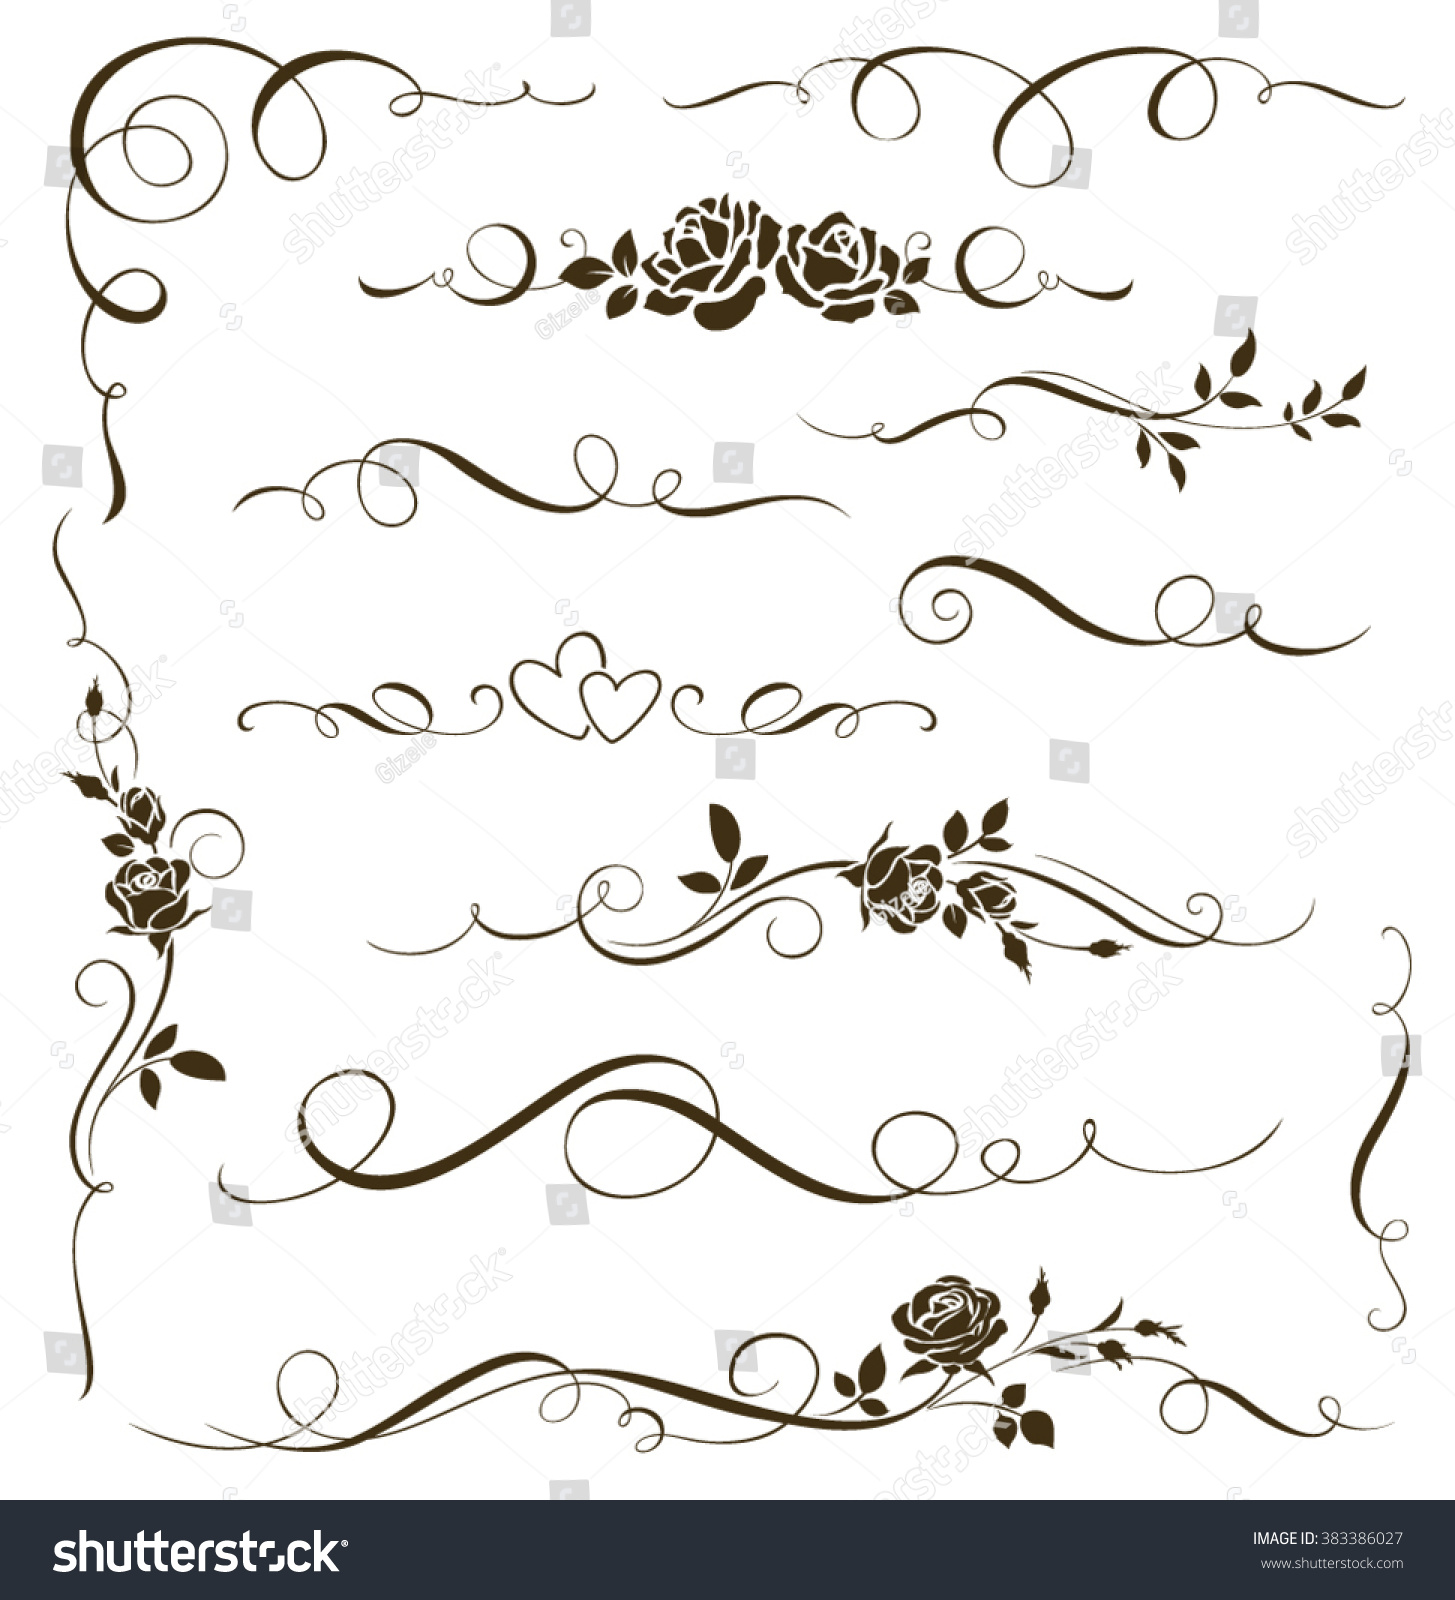 Vector set of floral calligraphic elements, dividers and rose ornaments for page decoration and frame design. Decorative silhouette for wedding cards and invitations. Vintage flowers and leaves #383386027